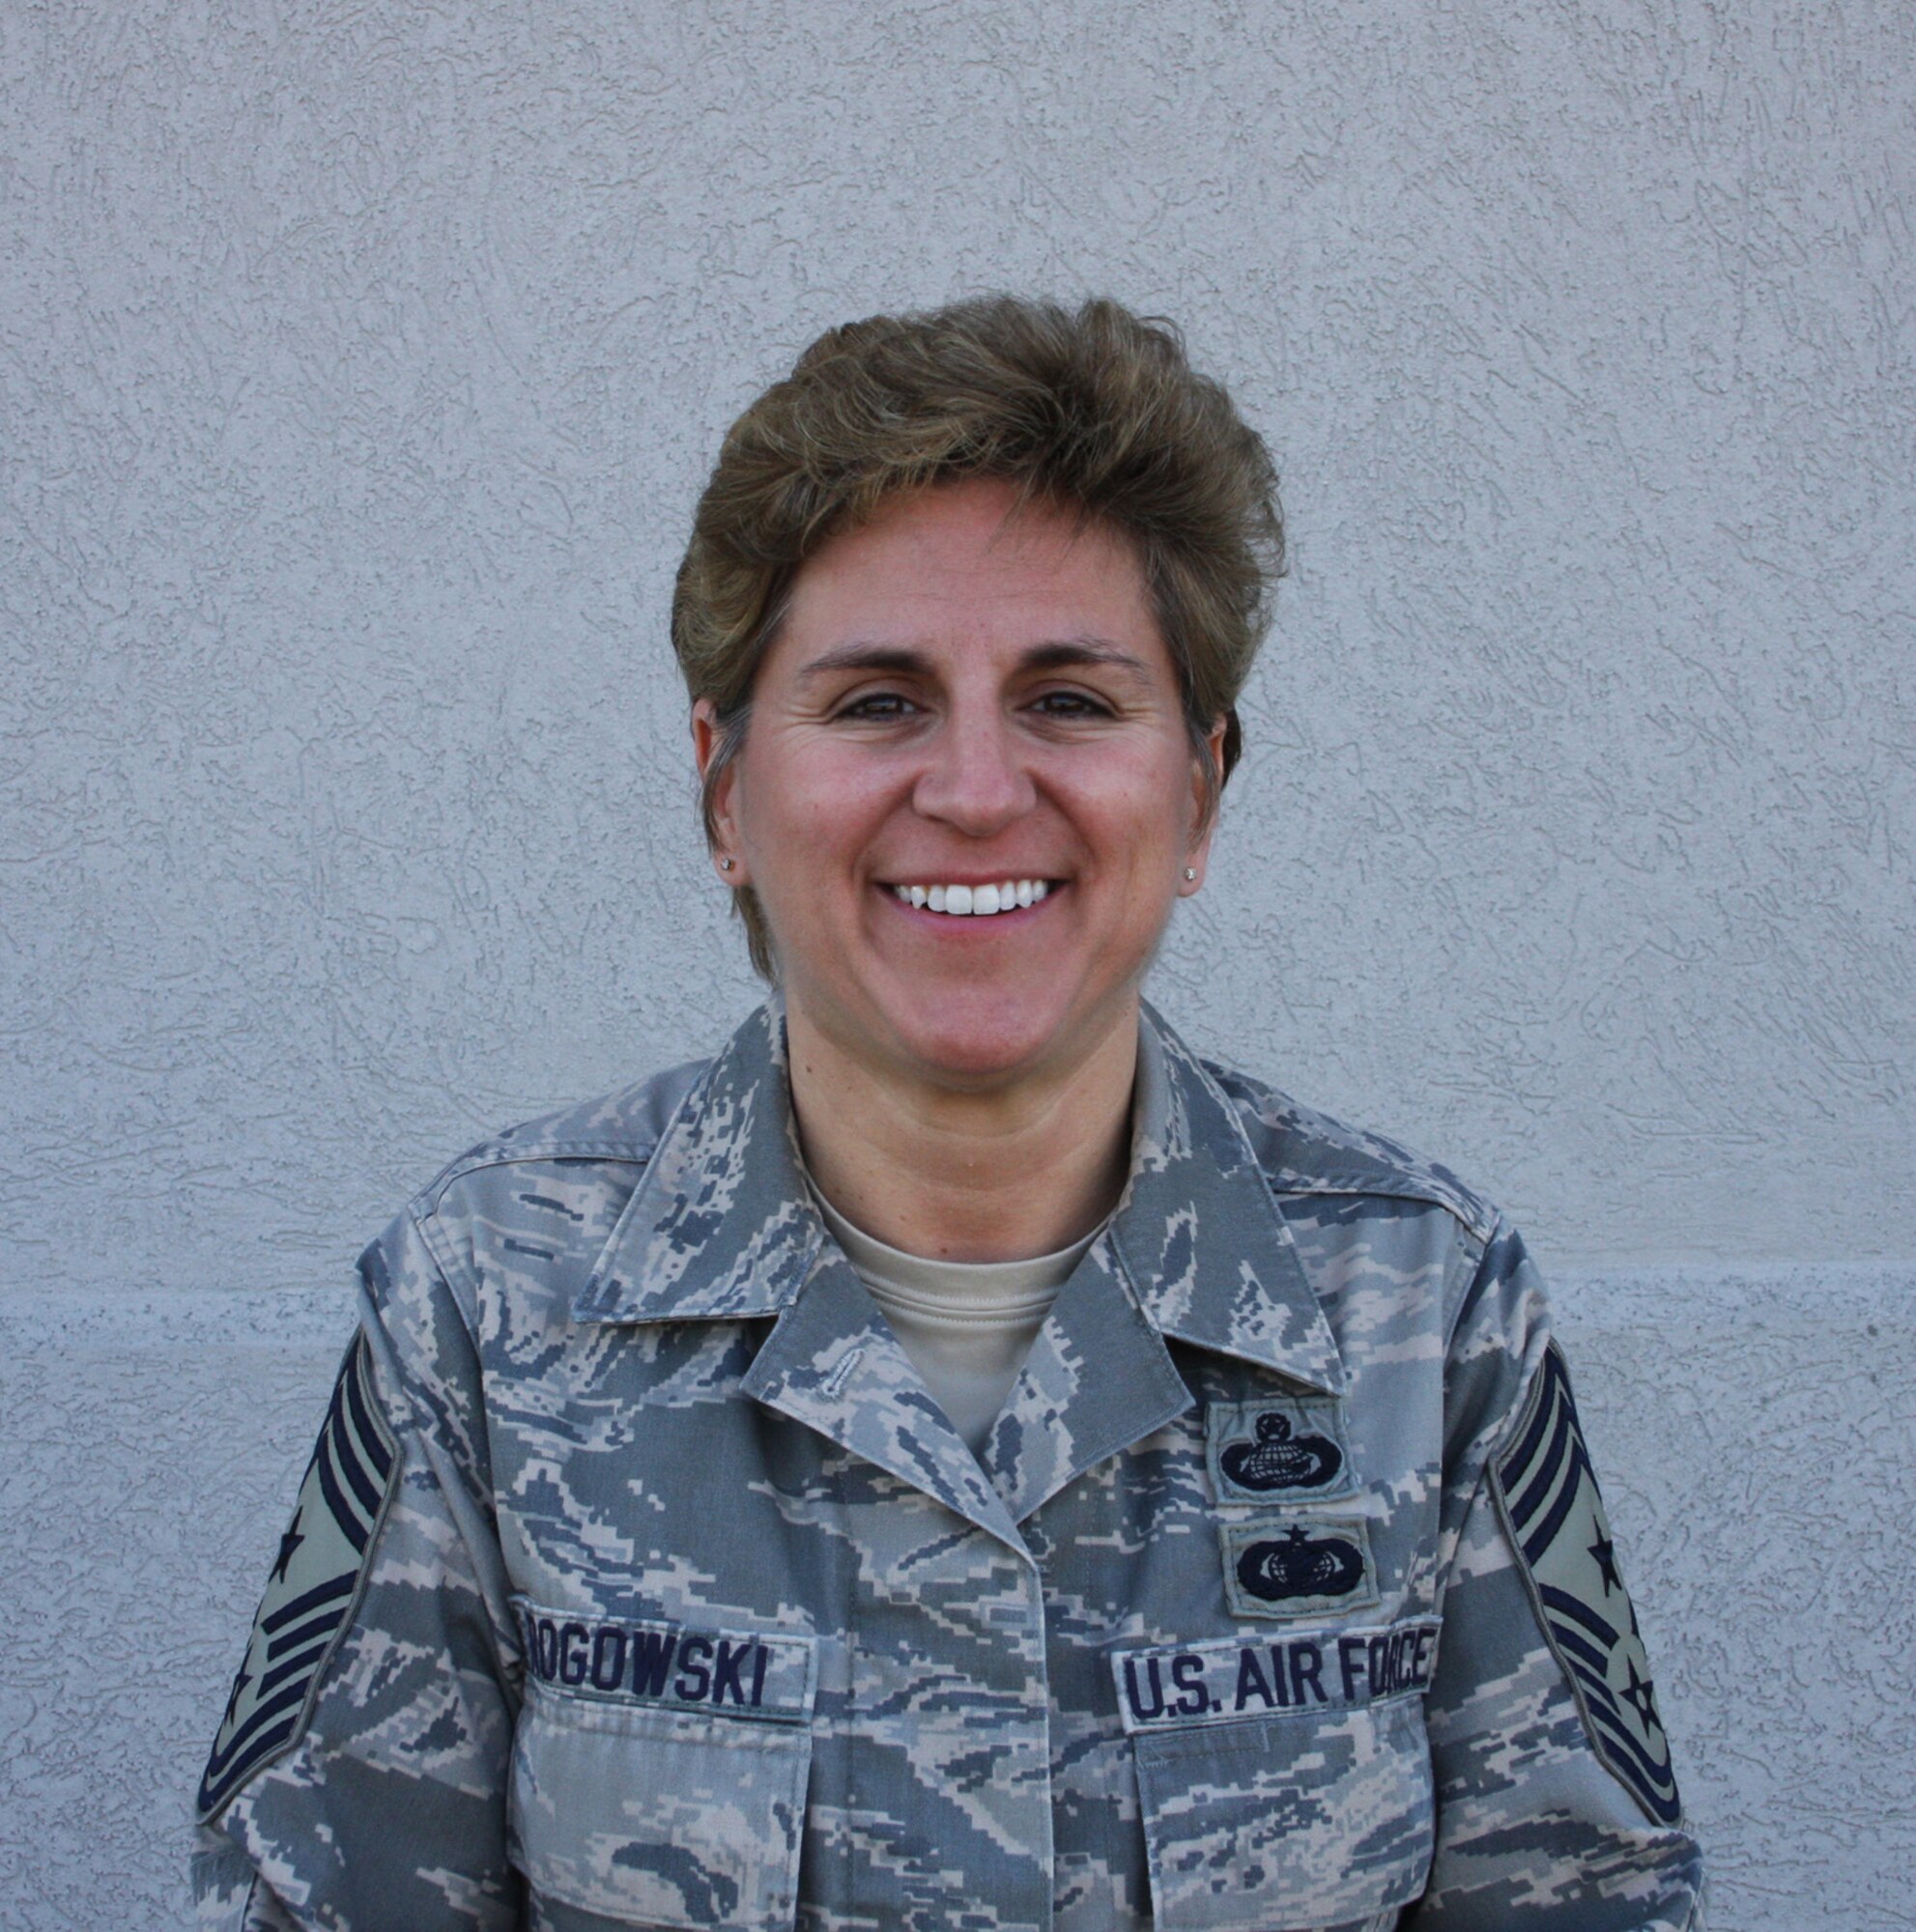 WRIGHT-PATTEROSON AIR FORCE BASE, Ohio - Chief Master Sgt. Peri Rogoowski became a part of history April 15 when she became the first female command chief for the 445th Airlift Wing.